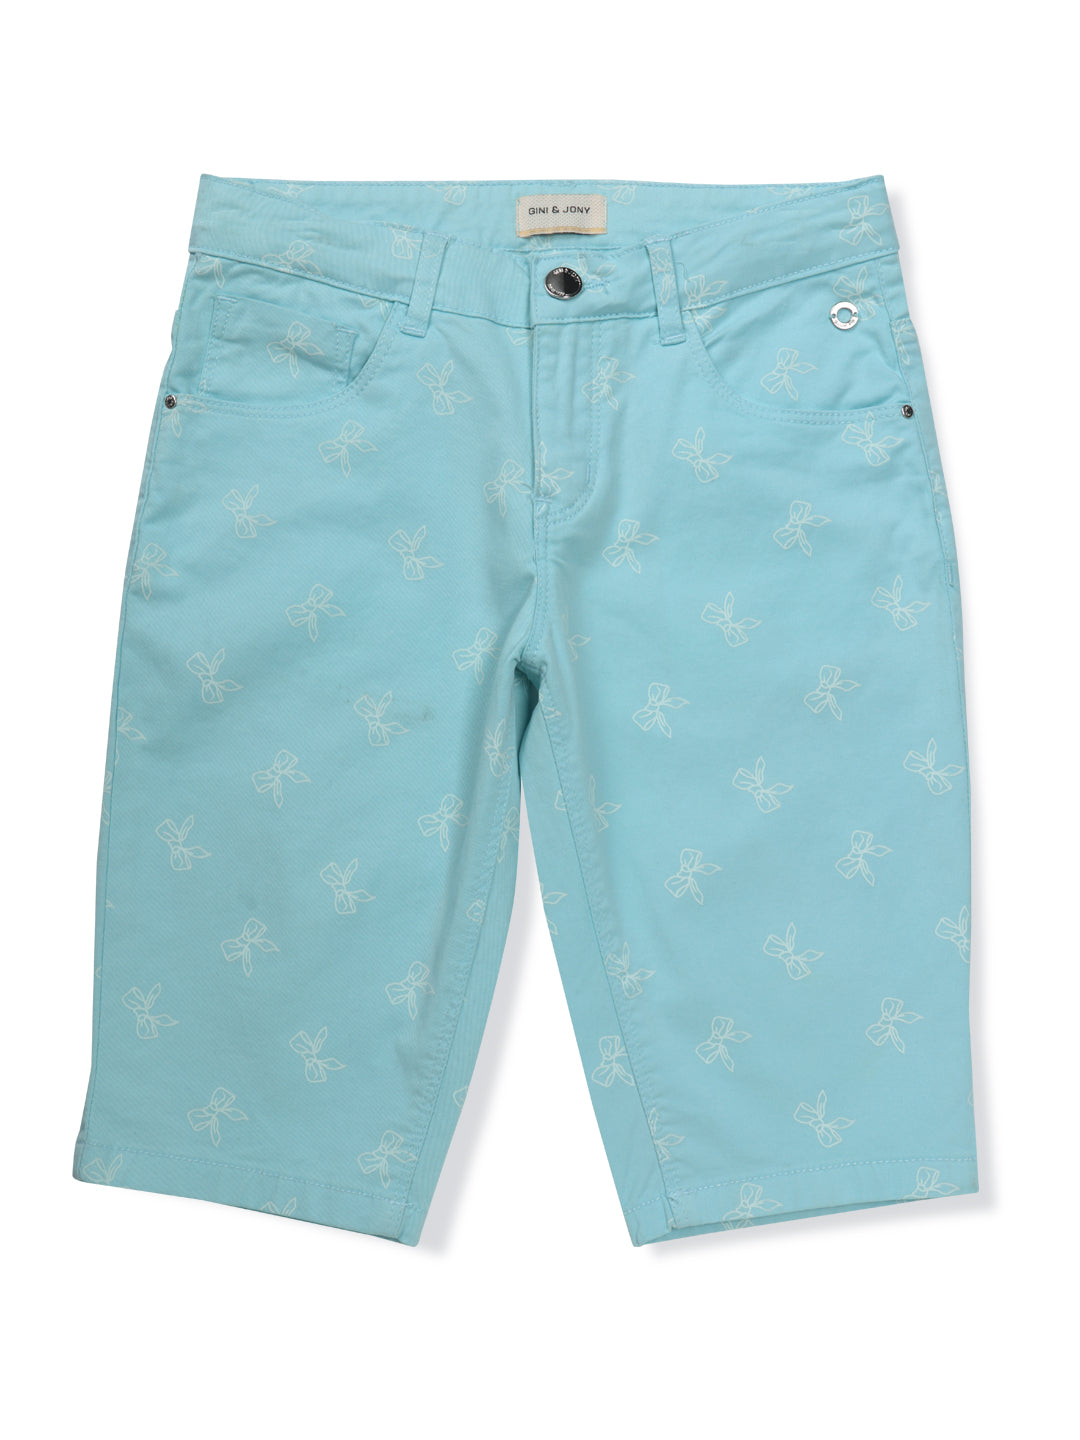 Girls Blue Printed Woven Pedal Pusher